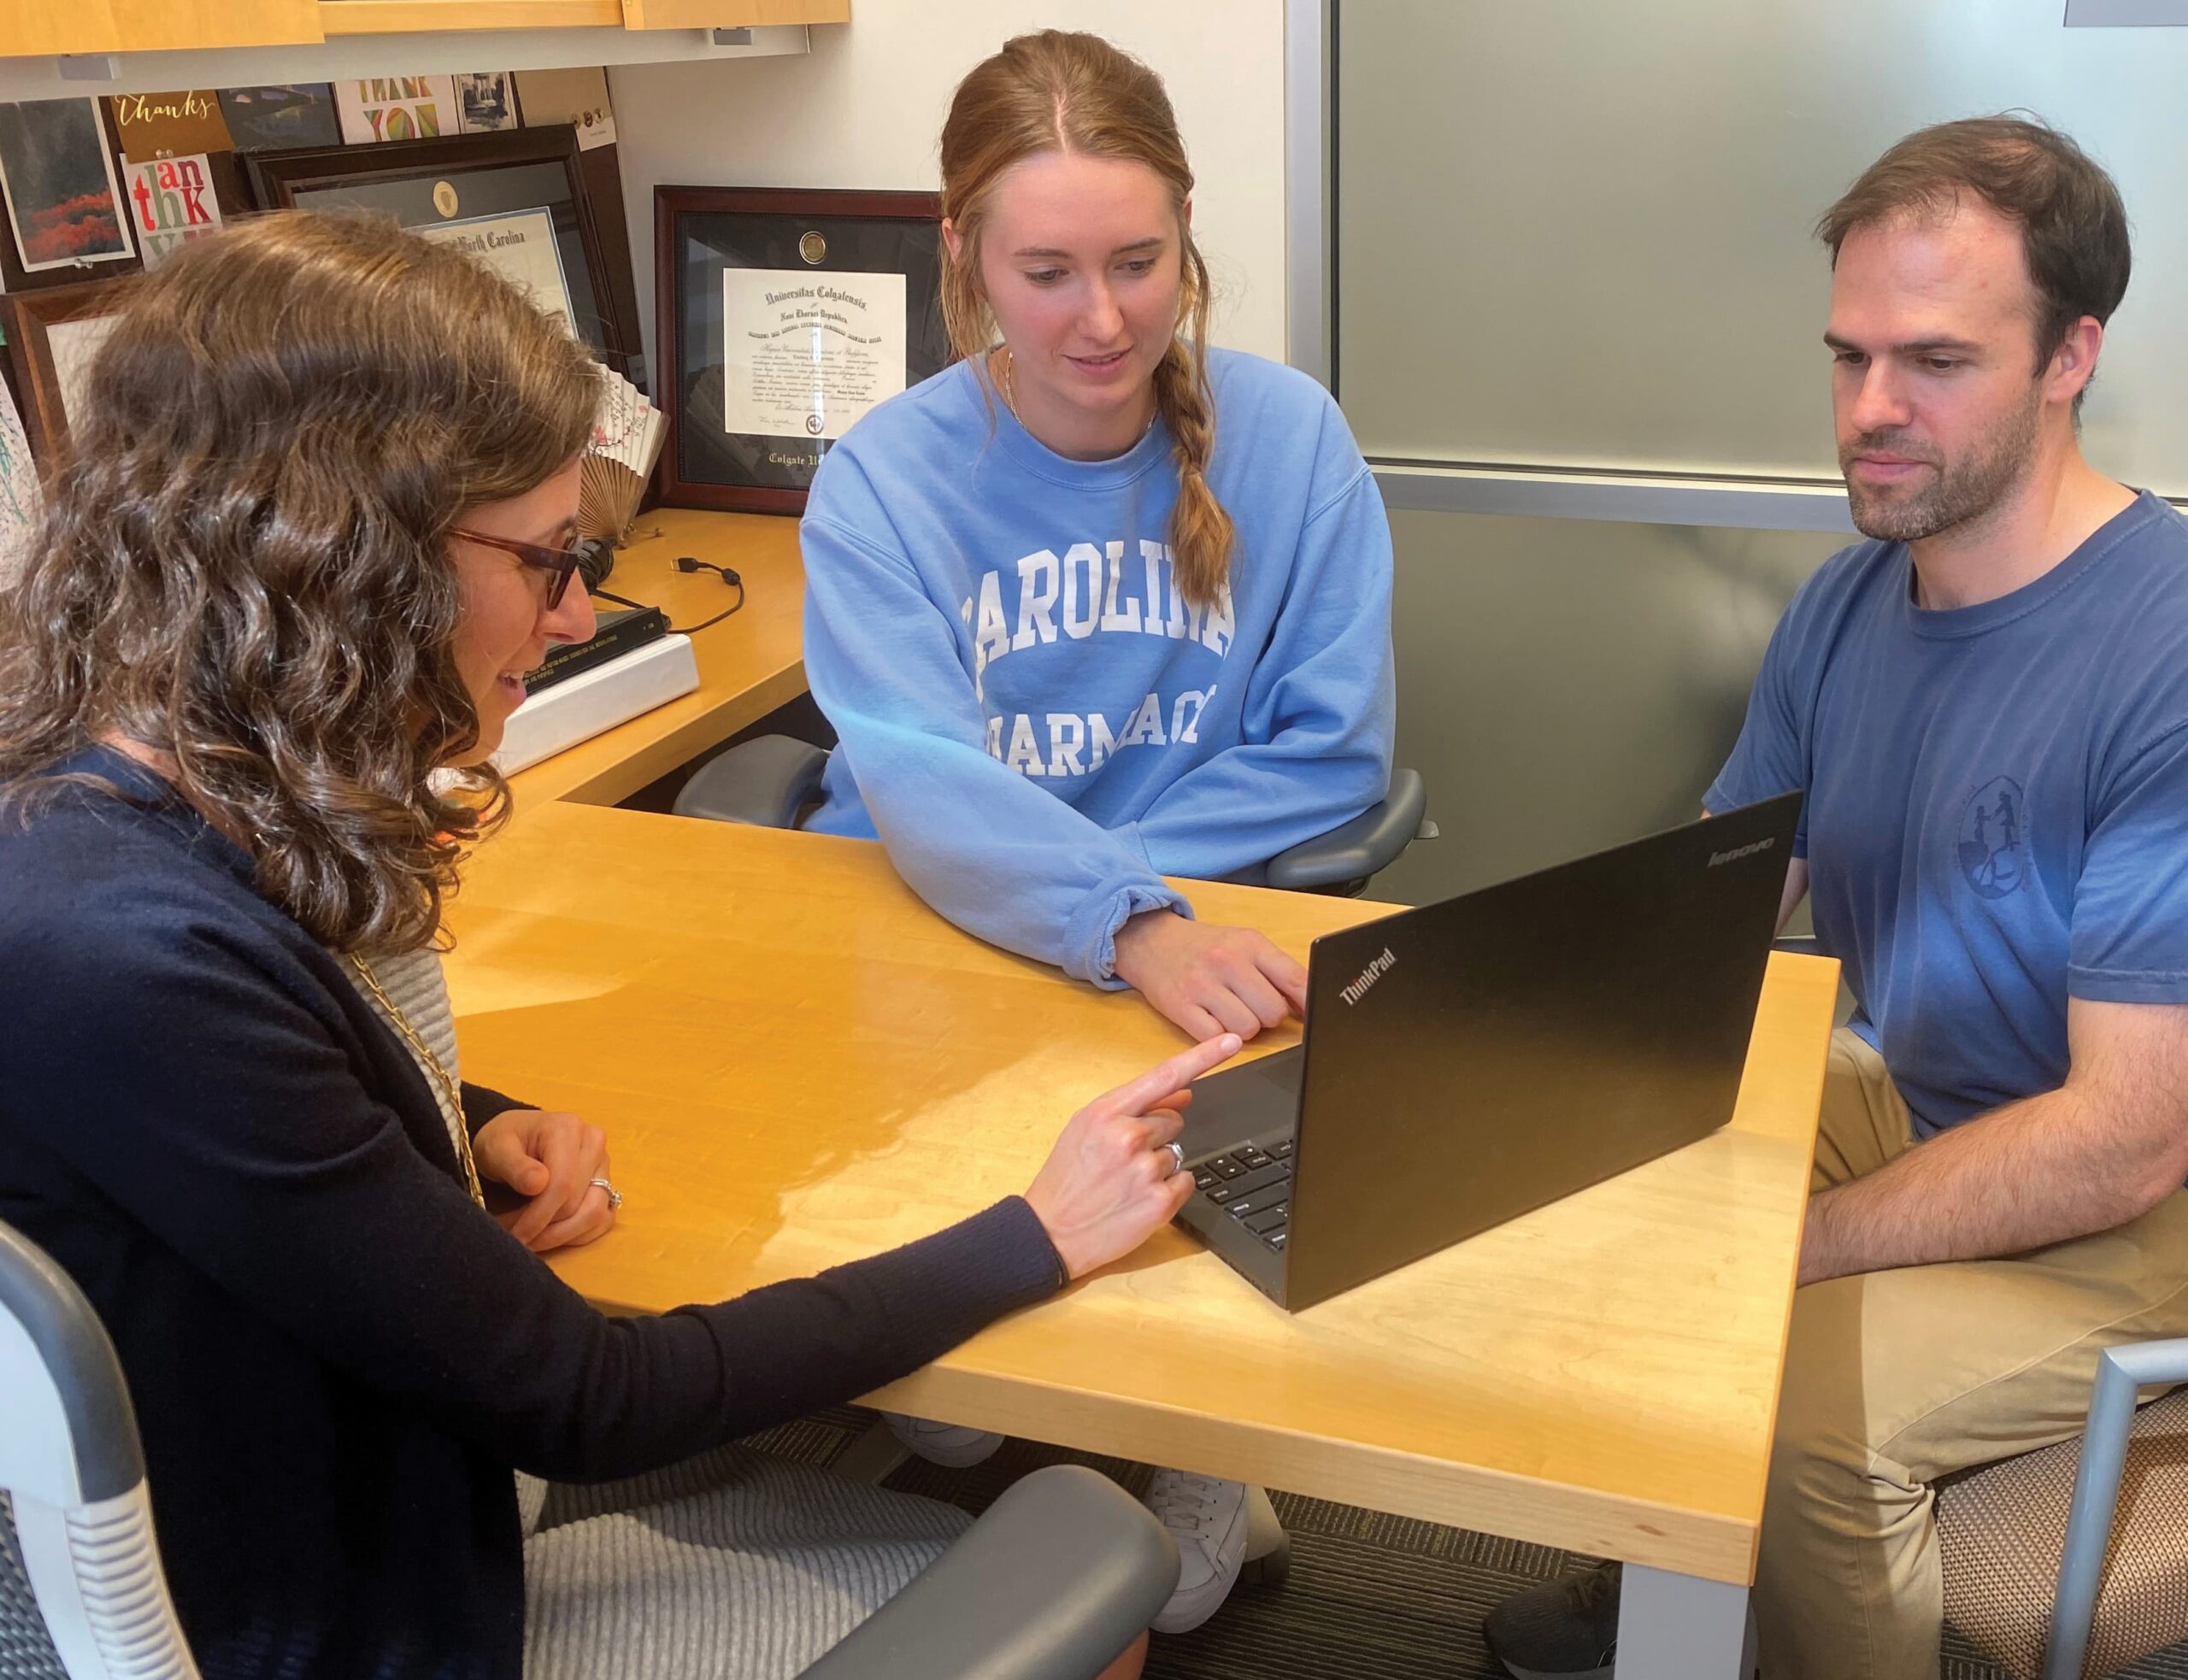 A group of three people collaborating on a laptop